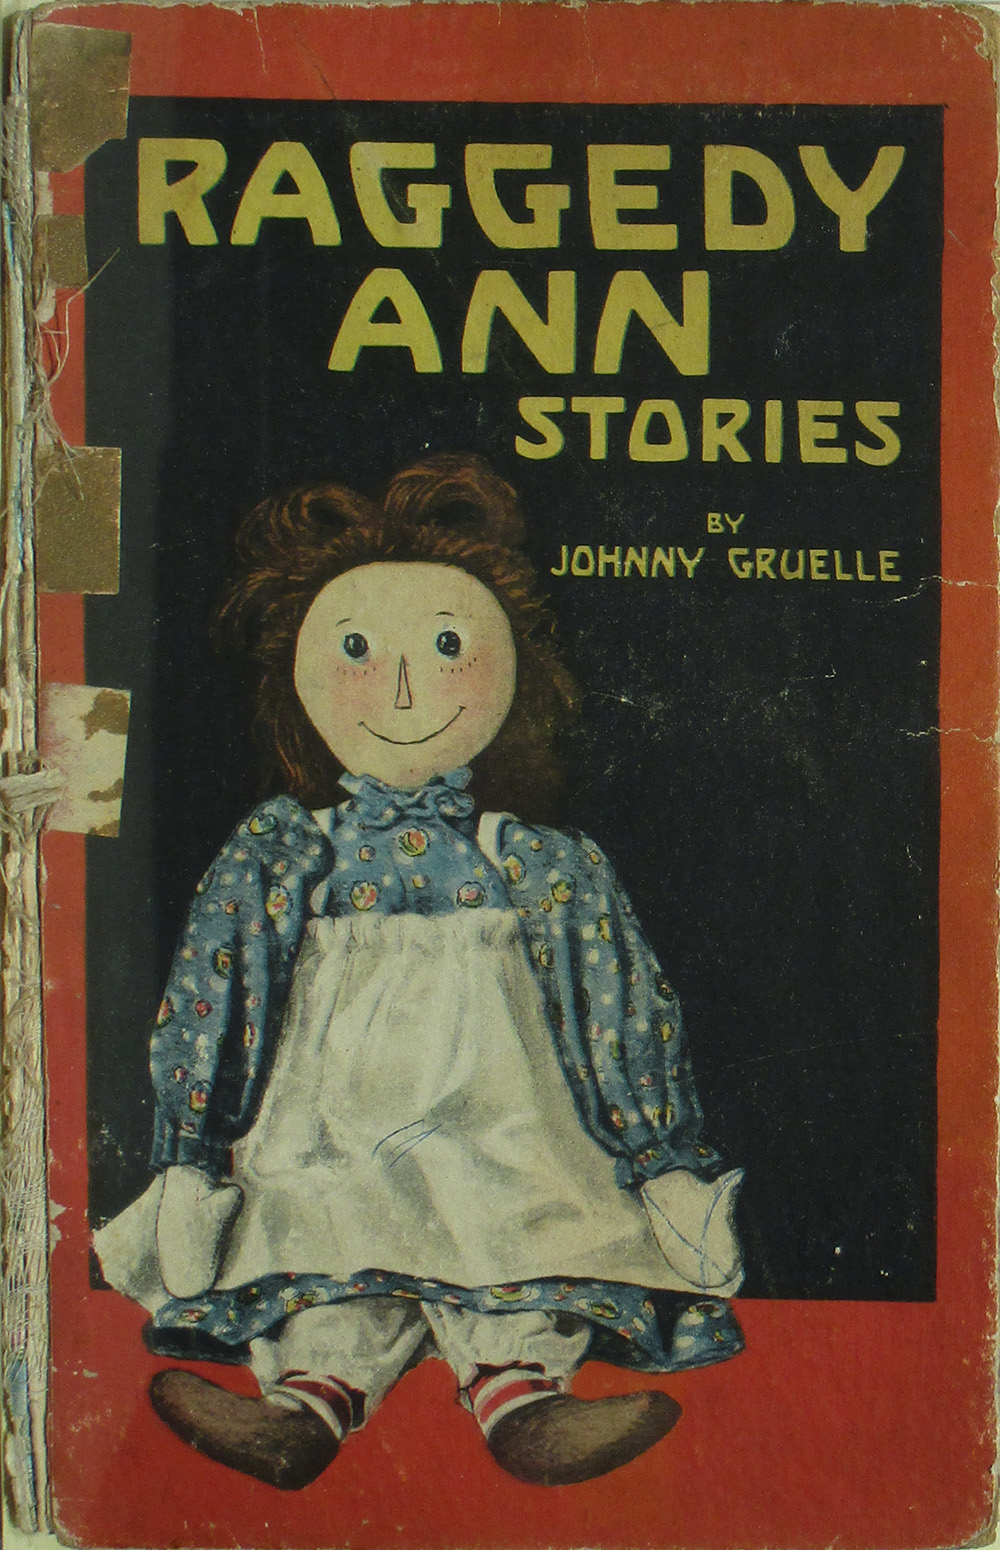 Old tattered book cover illustrating a smiling rag doll wearing a blue dress and white apron. Text: 'Raggedy Ann Stories'